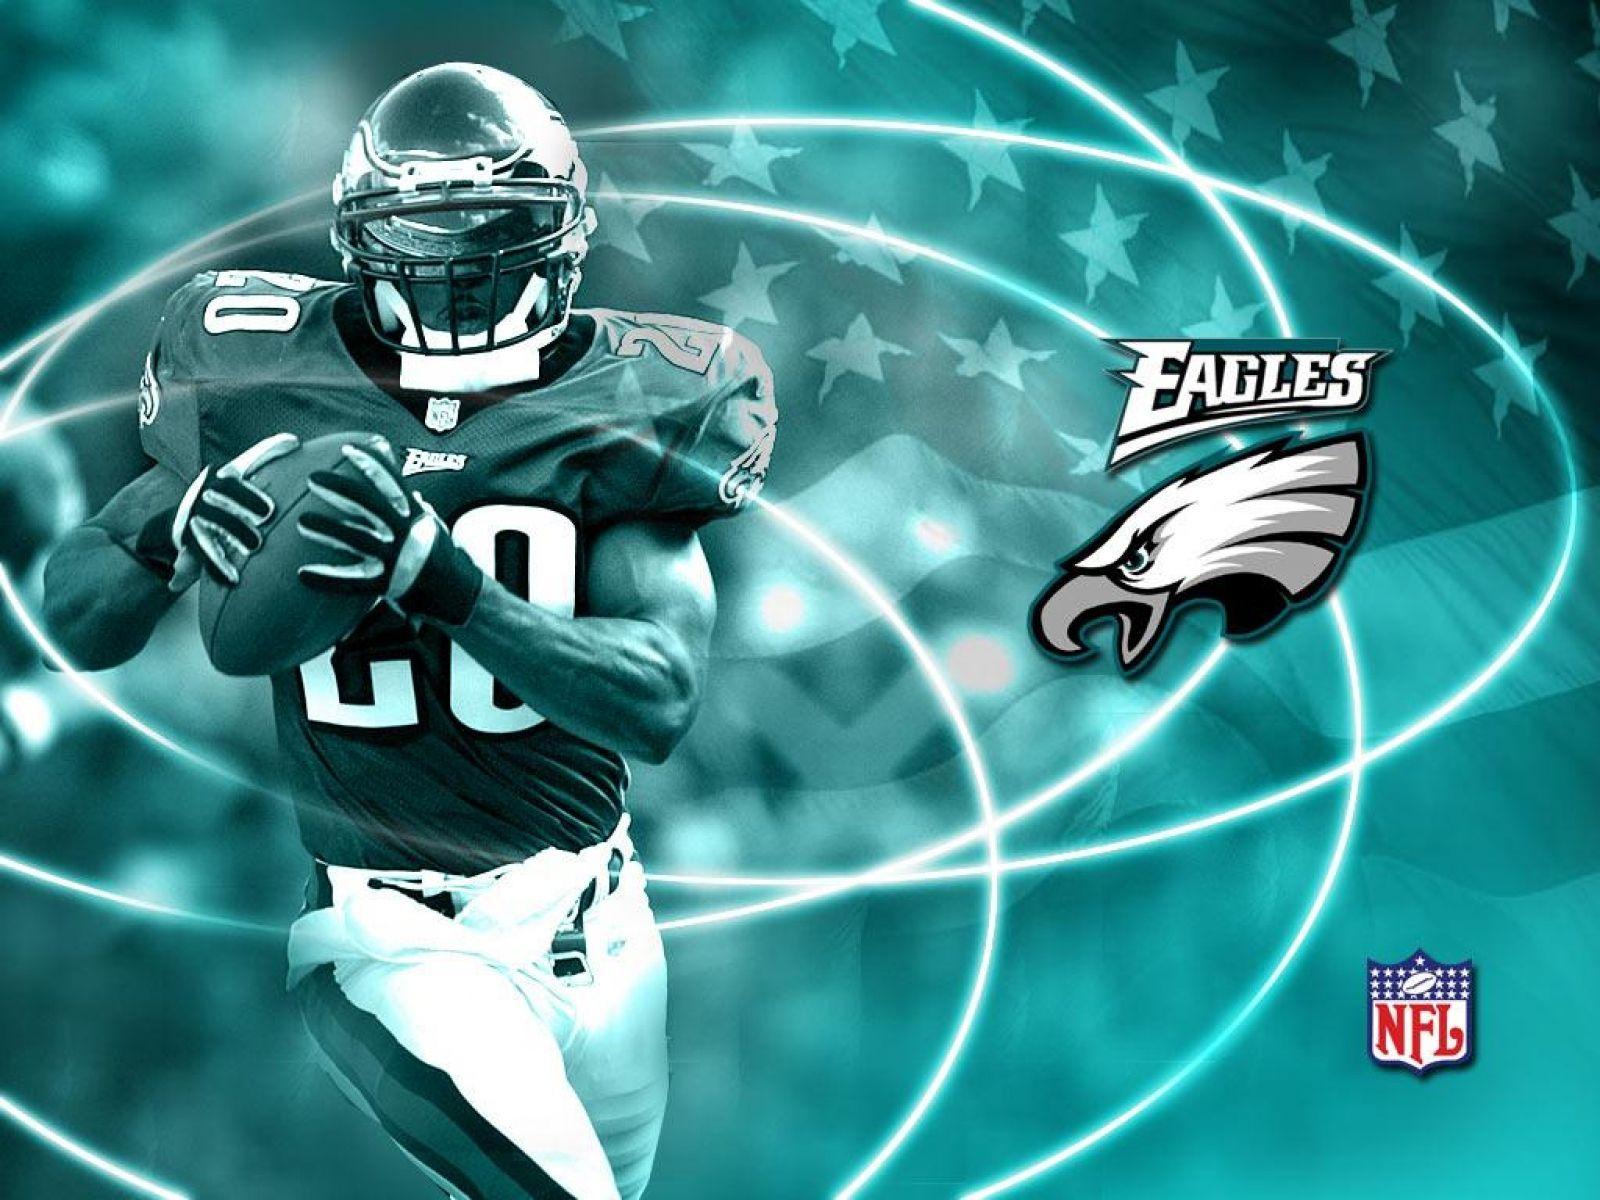 Eagles Football Wallpapers - Top Free